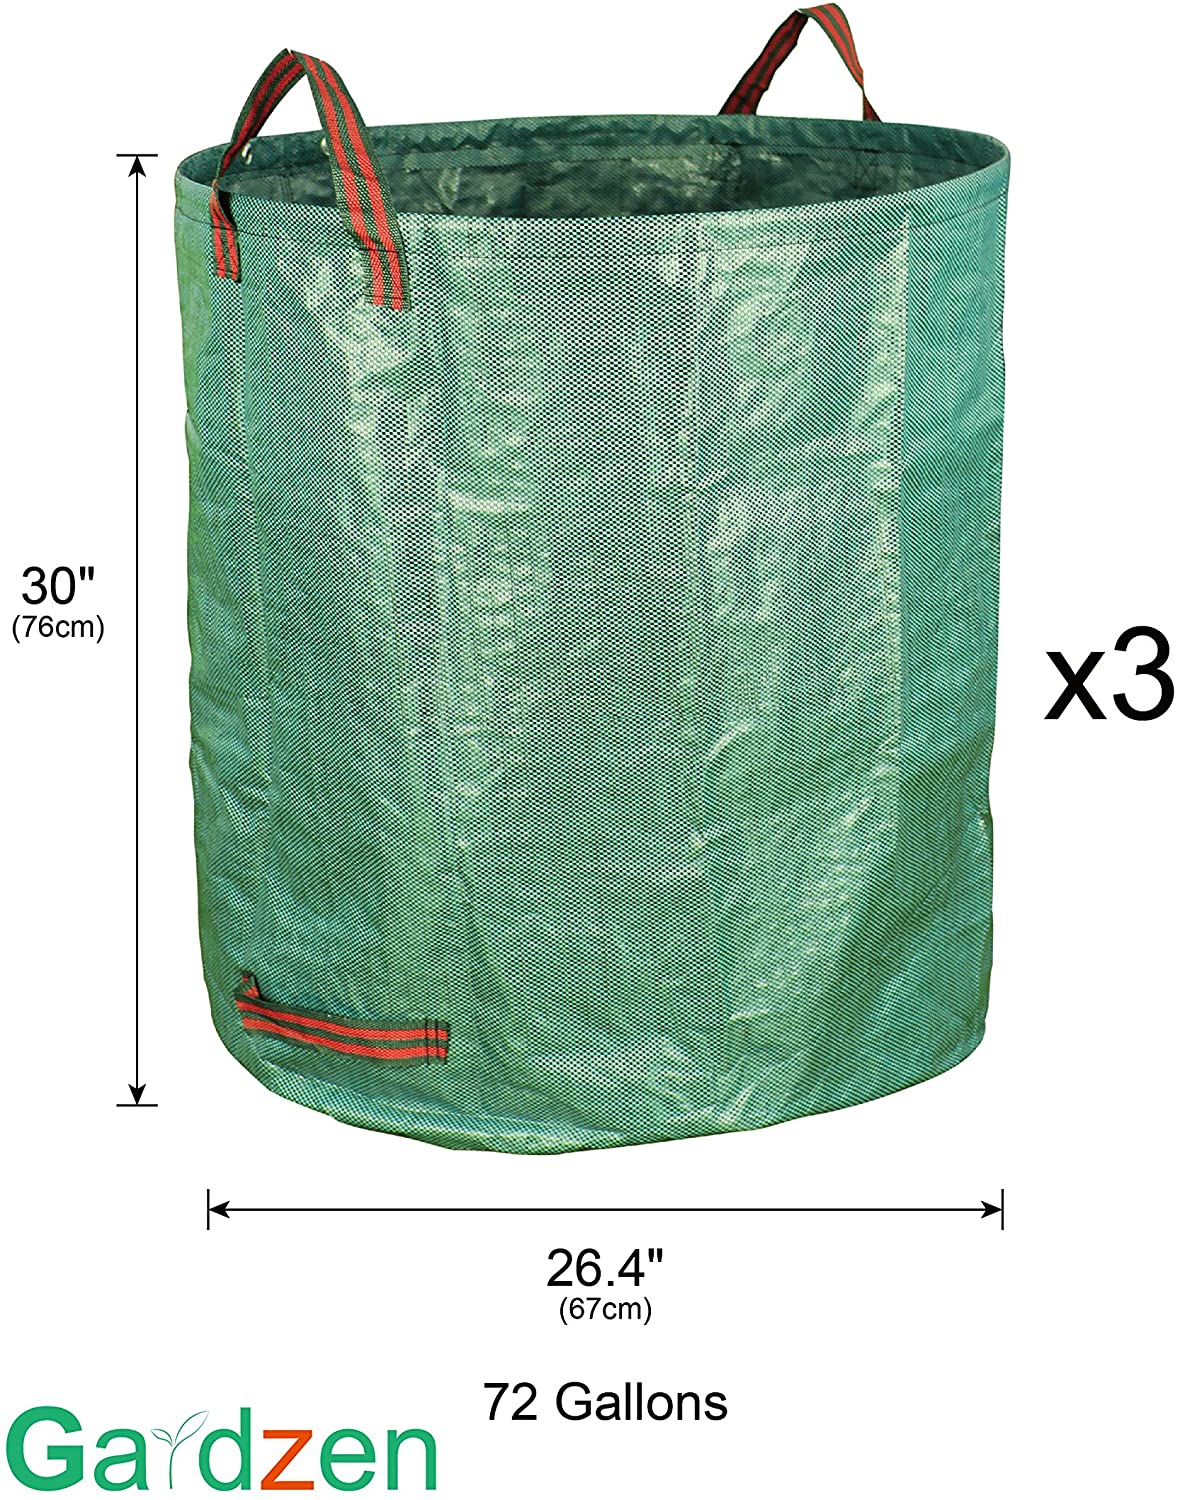 3 x 16 Gallons Lawn Garden Leaf Waste Bag 3-Pack 72 Gallons Reusable Garden Waste Bags Heavy Duty Gardening Bags 